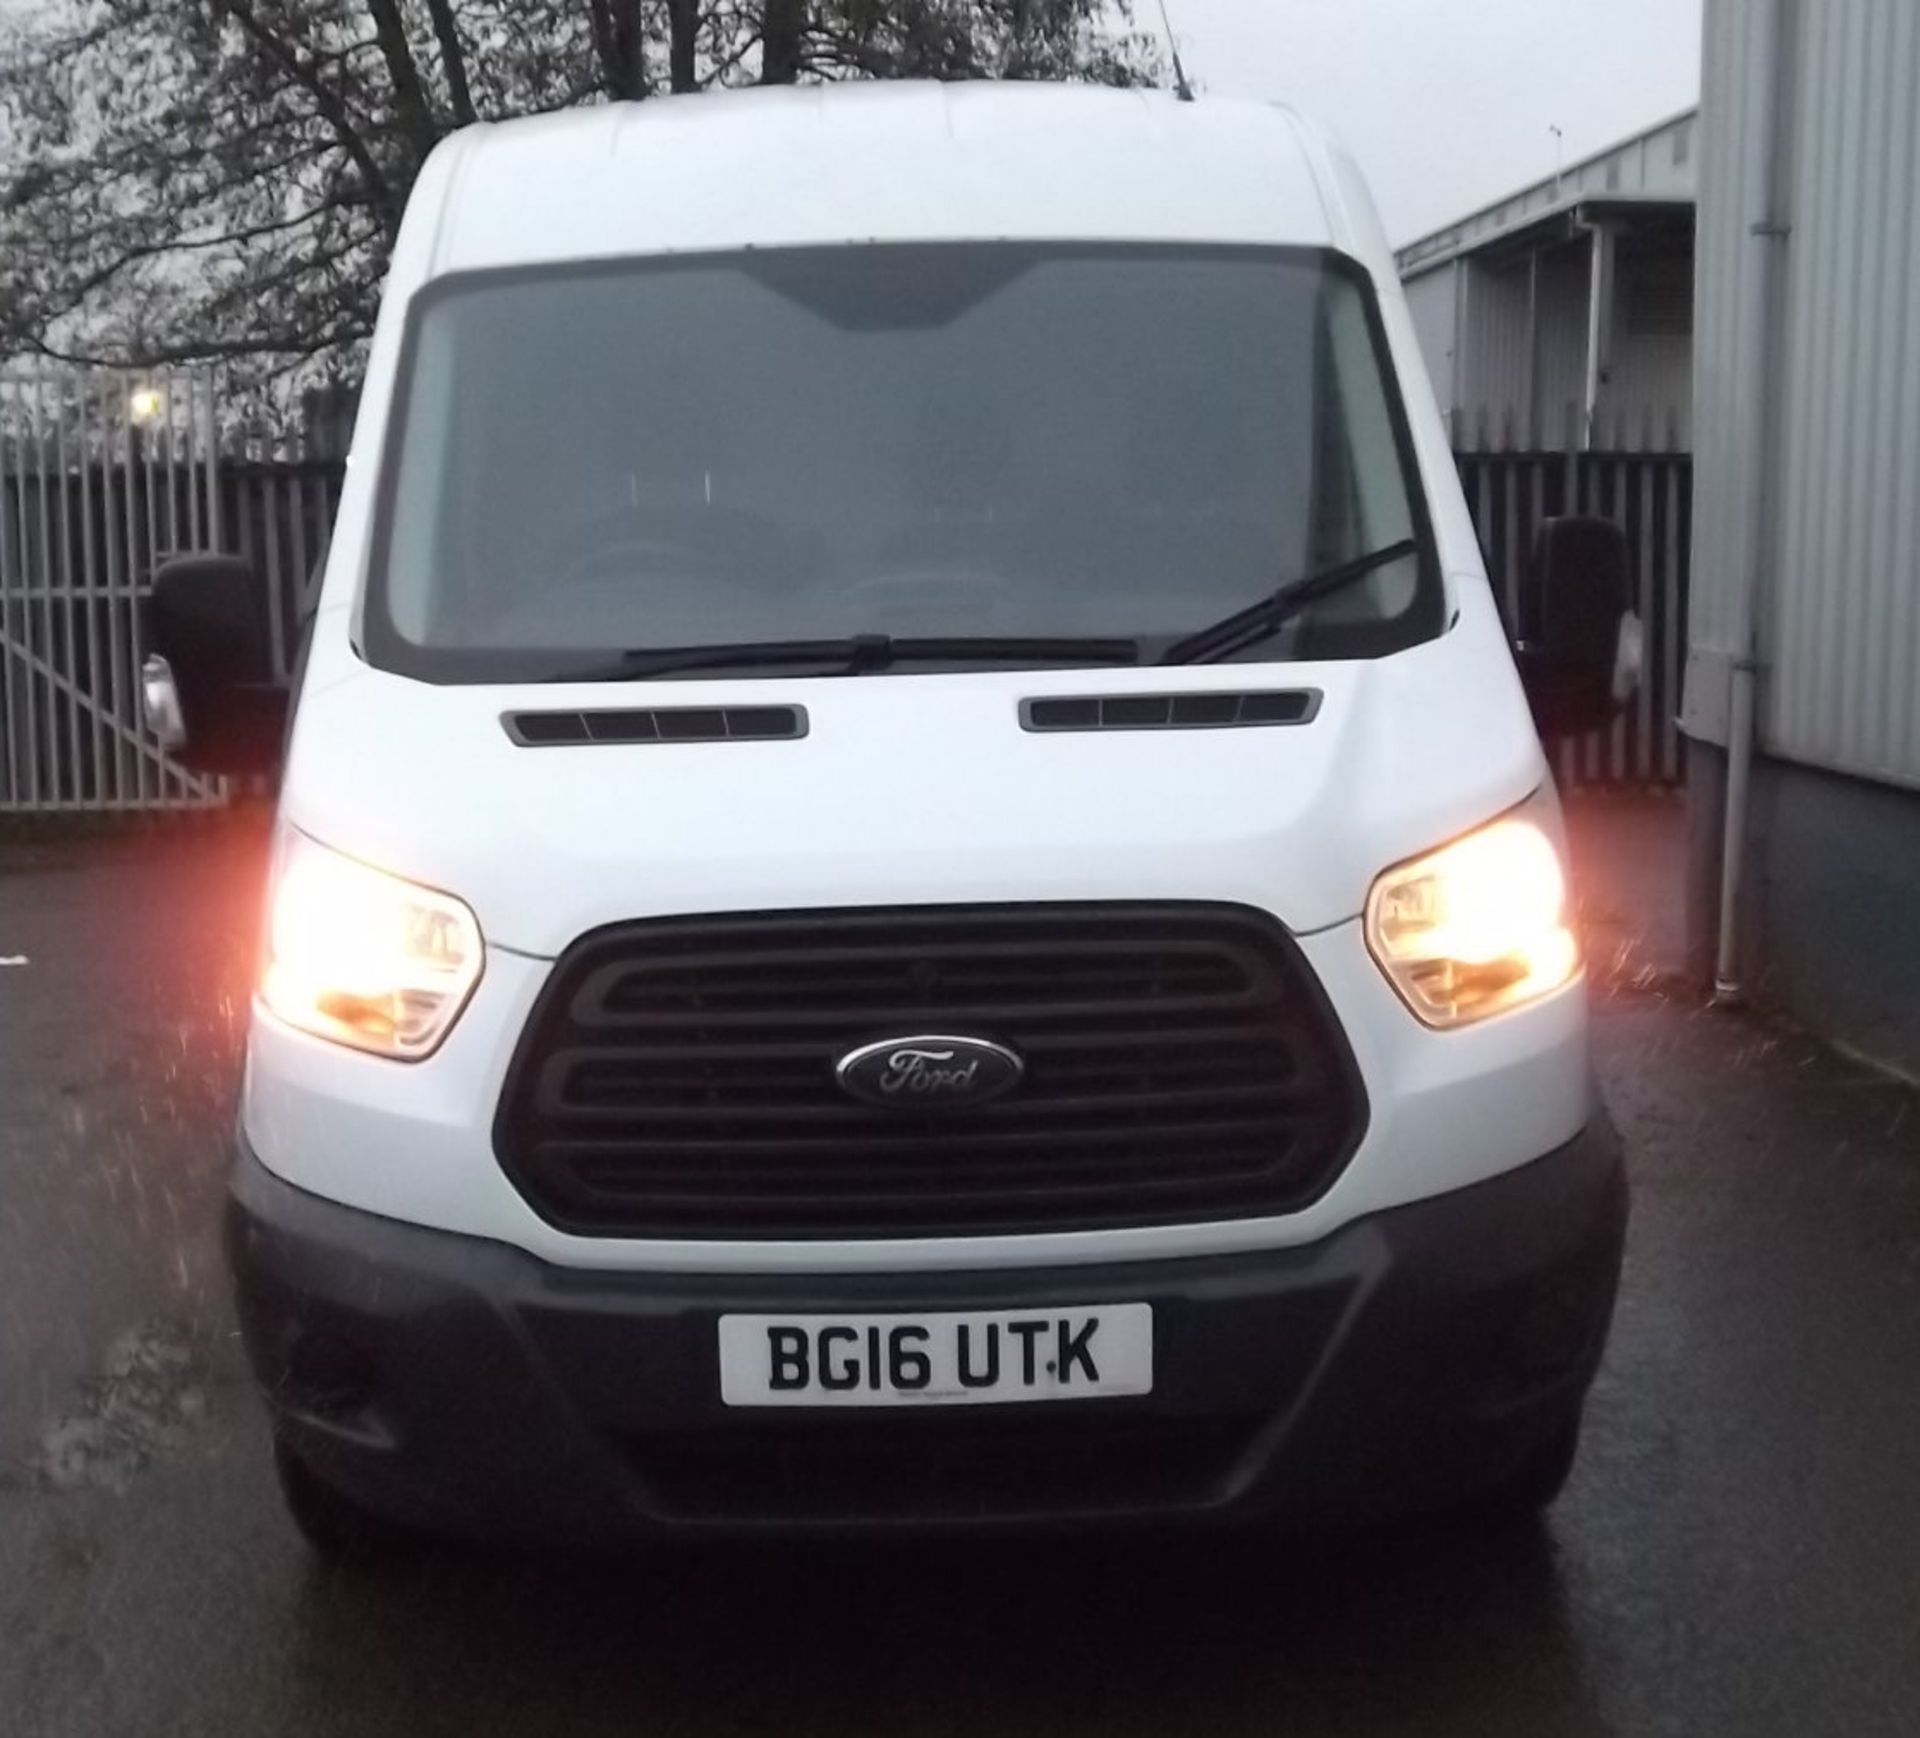 2016 Ford Transit 350 2.2 TDCi 125ps H2L3 Panel Van - CL505 - Location: Corby, Northamptonshire - Image 3 of 15